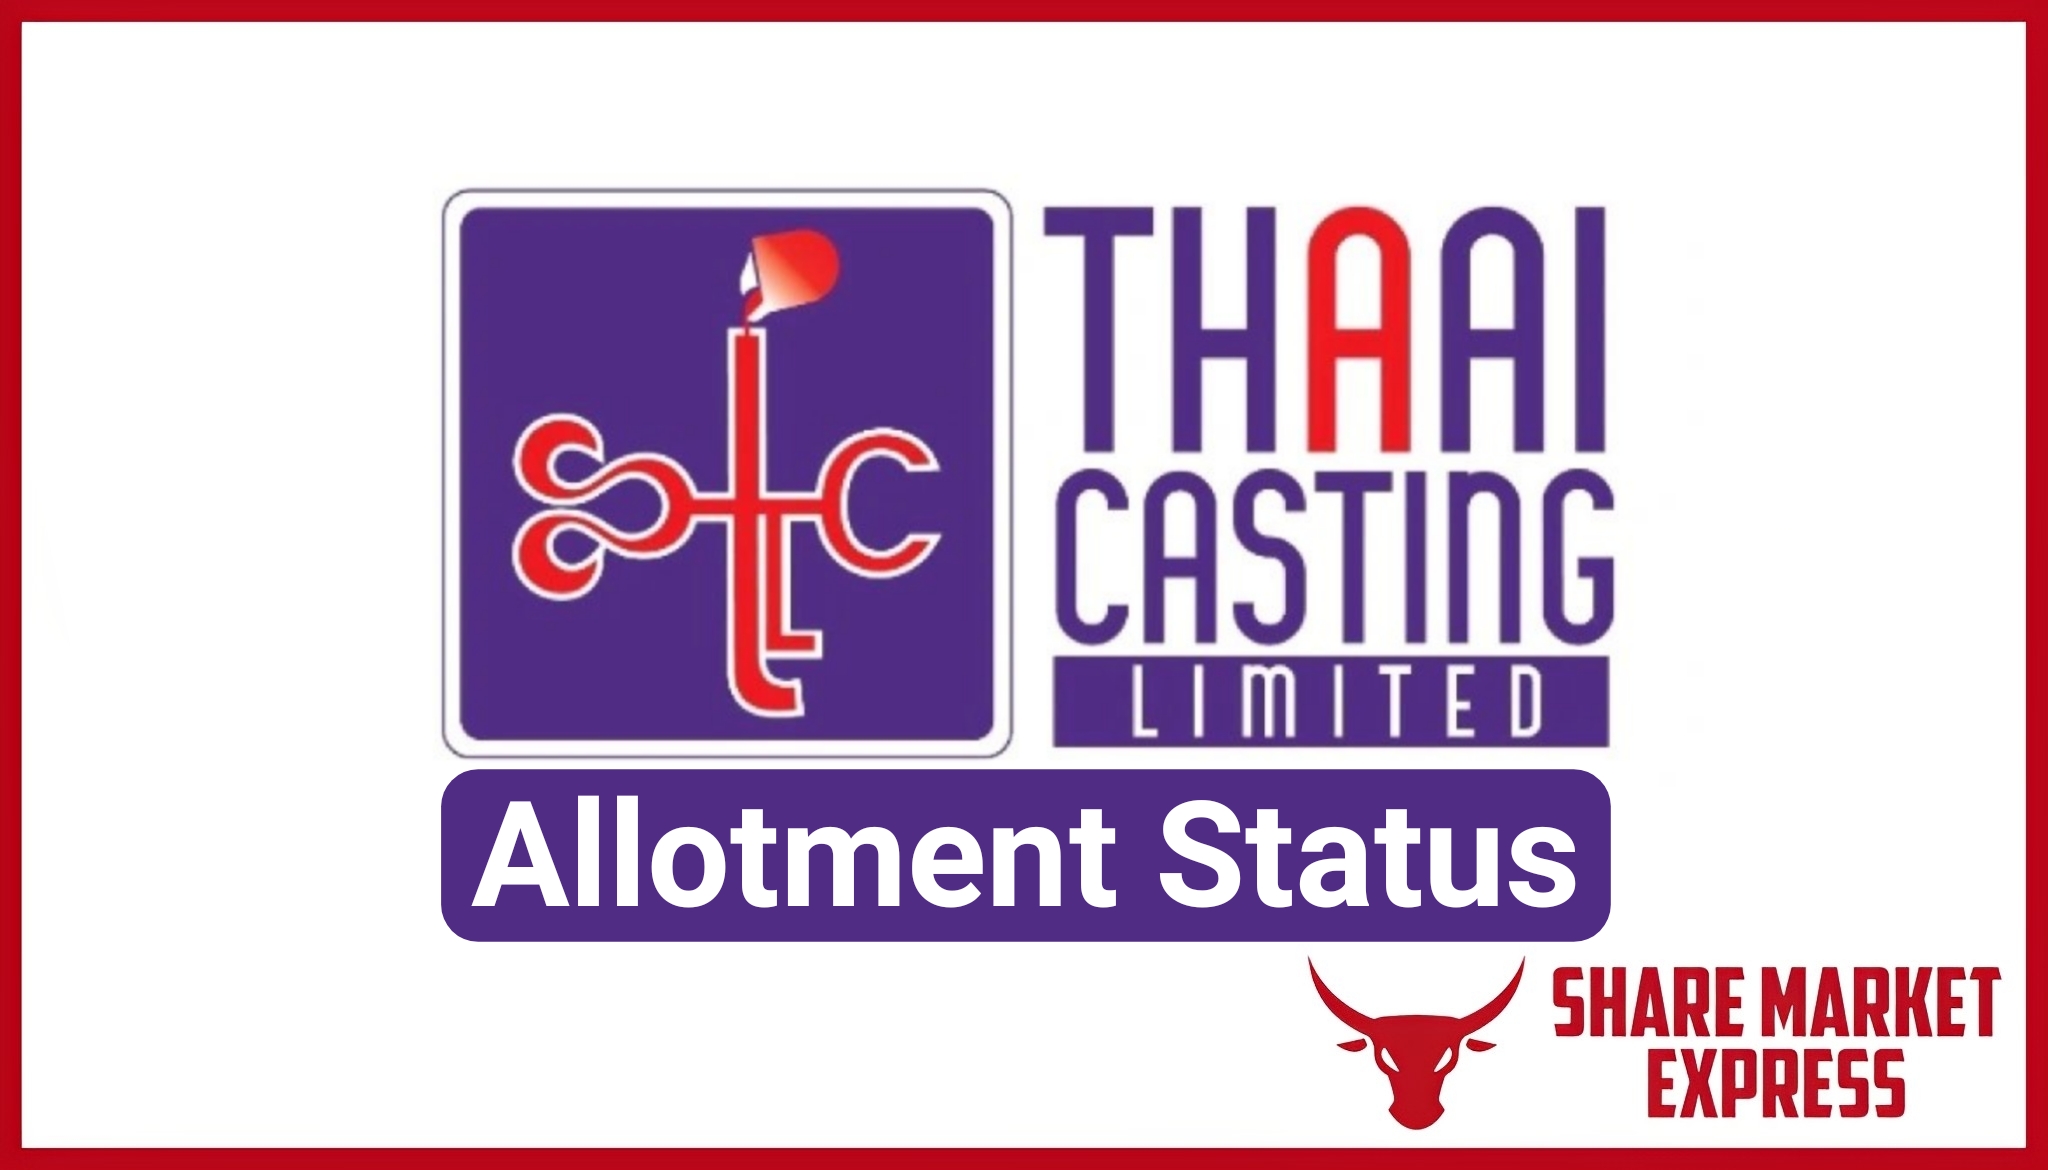 Thaai Casting IPO Allotment Status Check Online (Link)